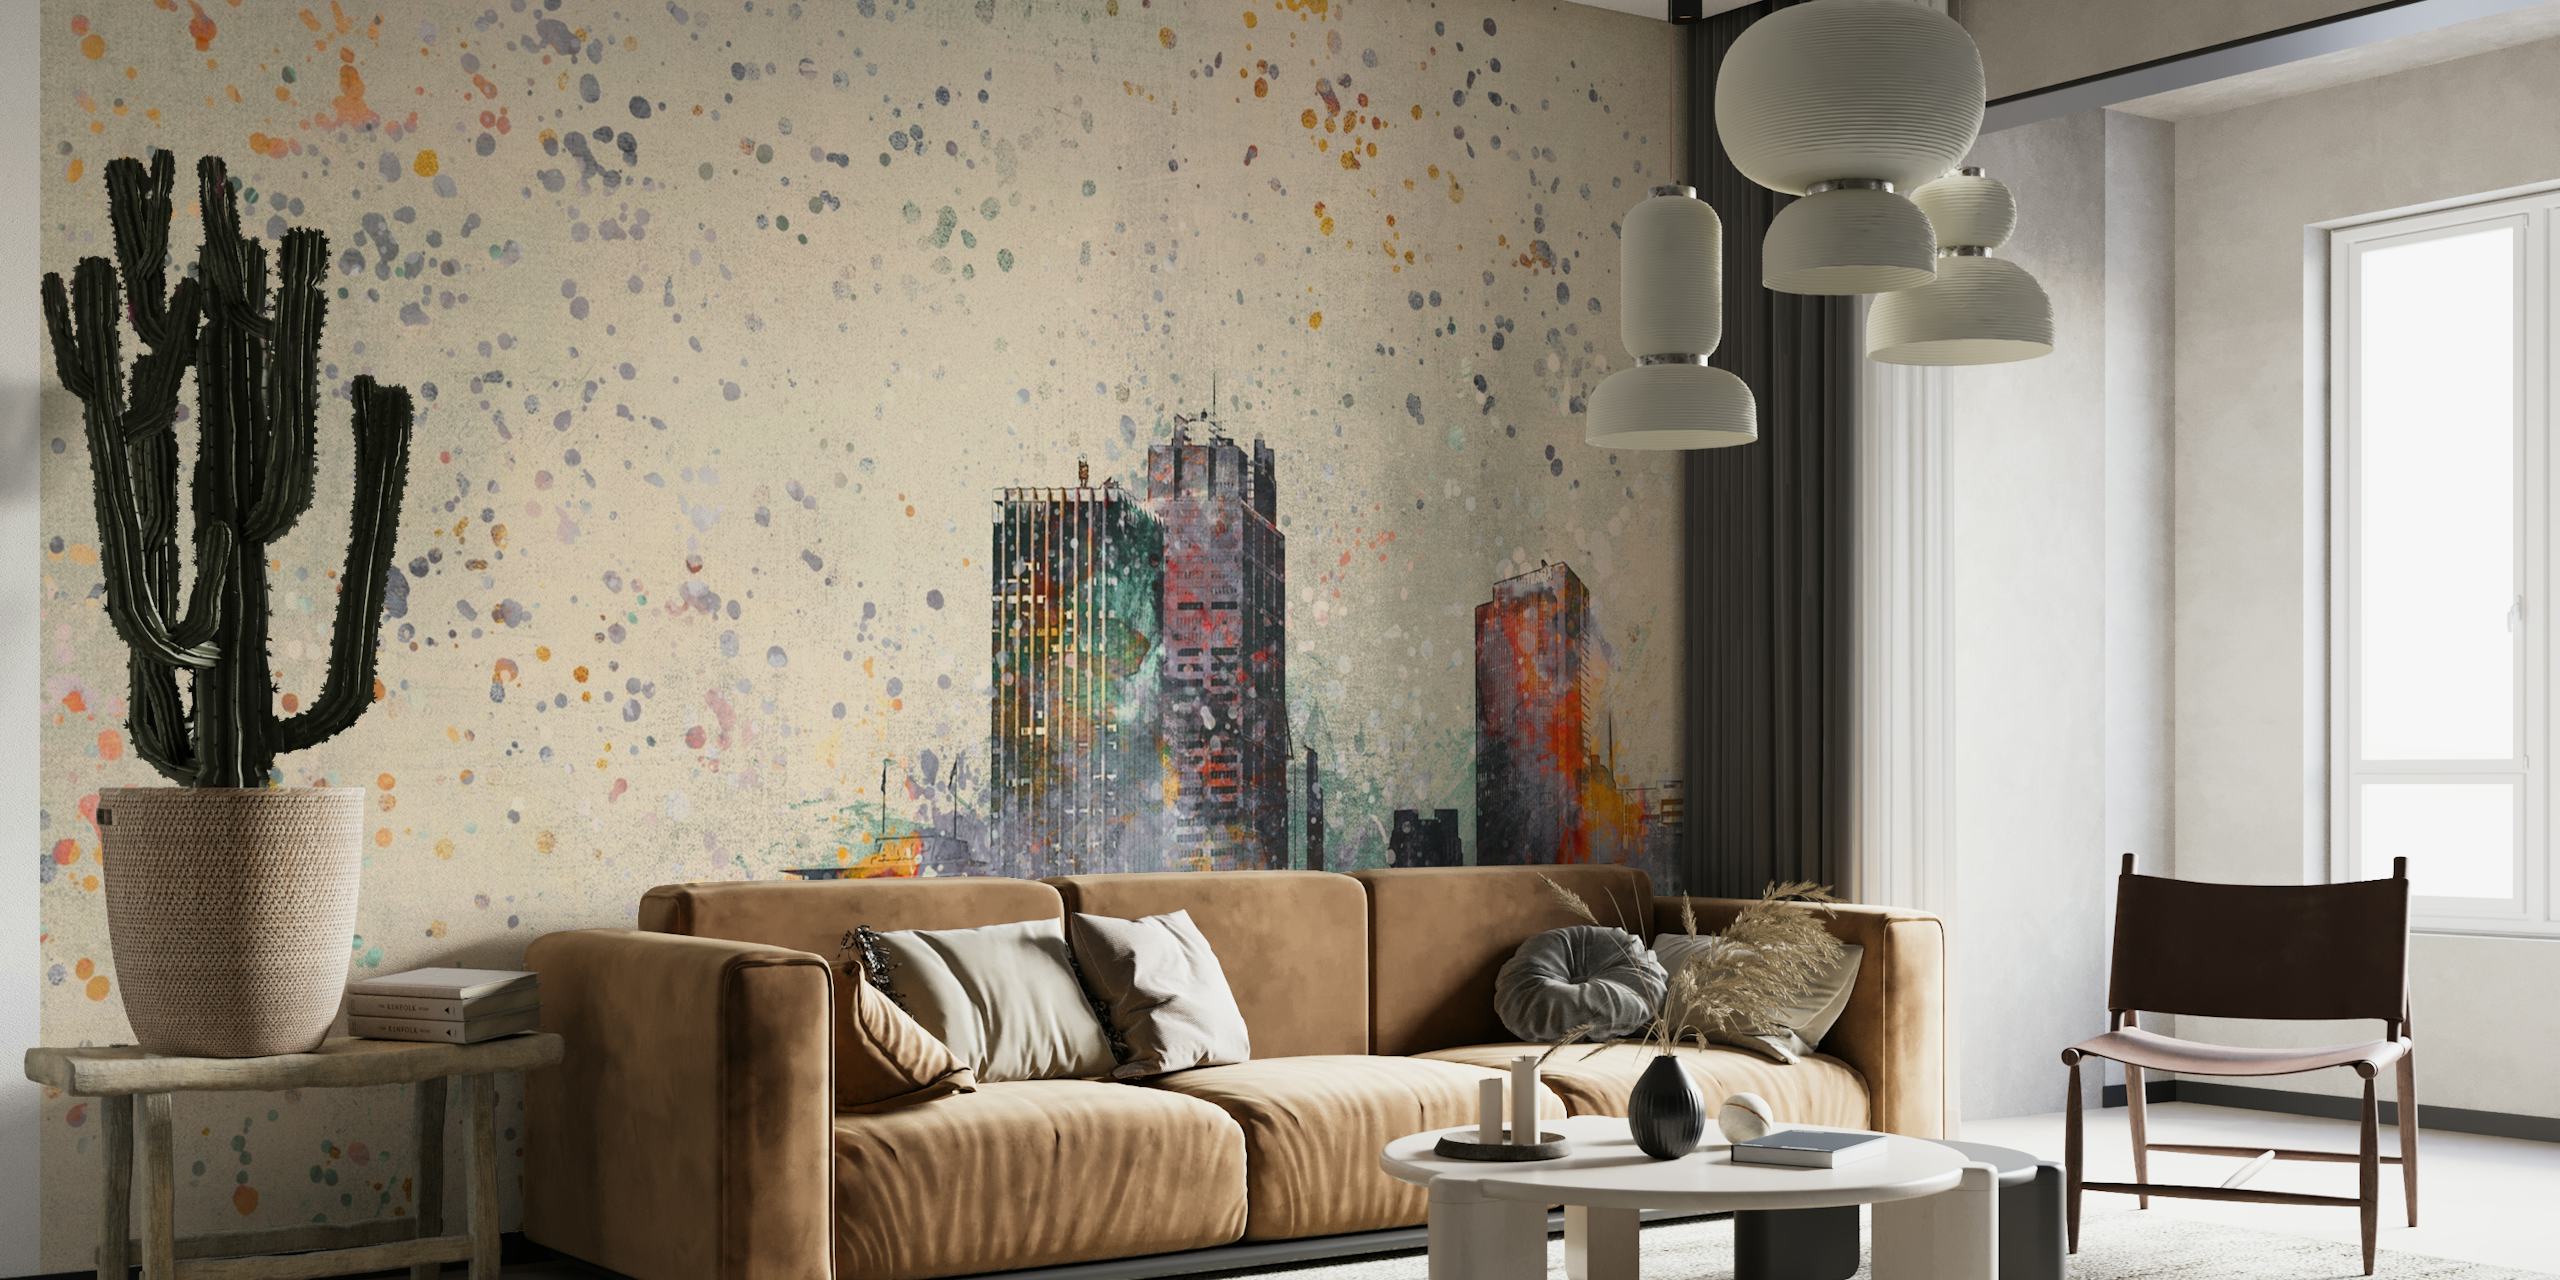 Abstract cityscape wall mural with vibrant colors and splattered paint effect